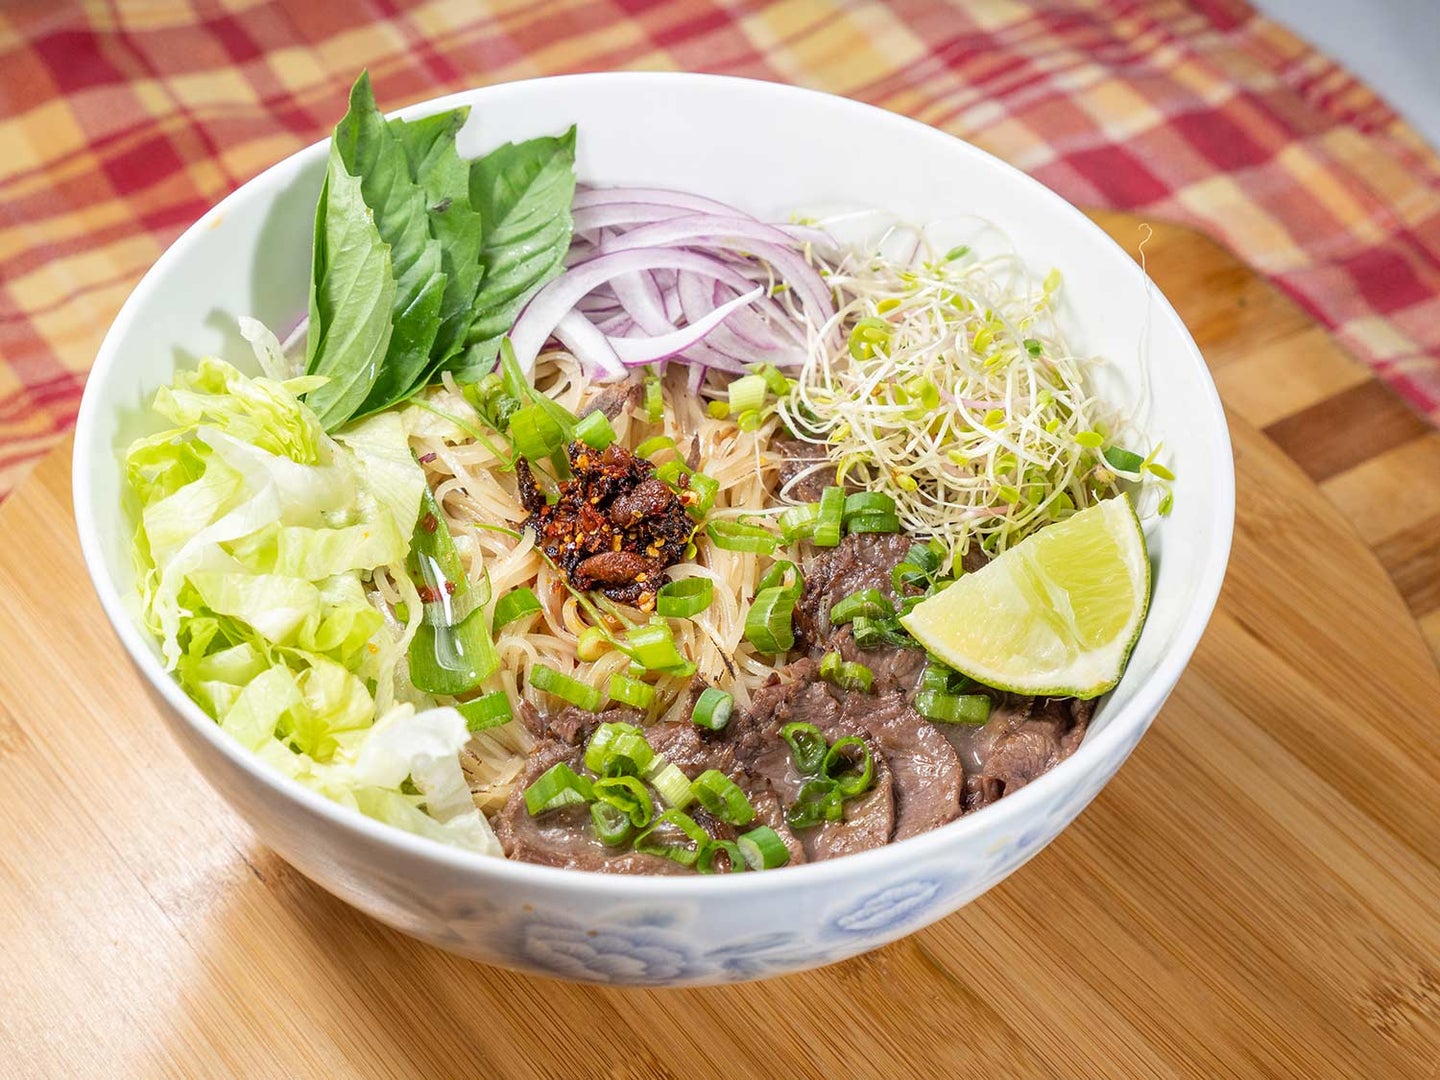 A warm bowl of pho is a restorative meal on a cold winter night.